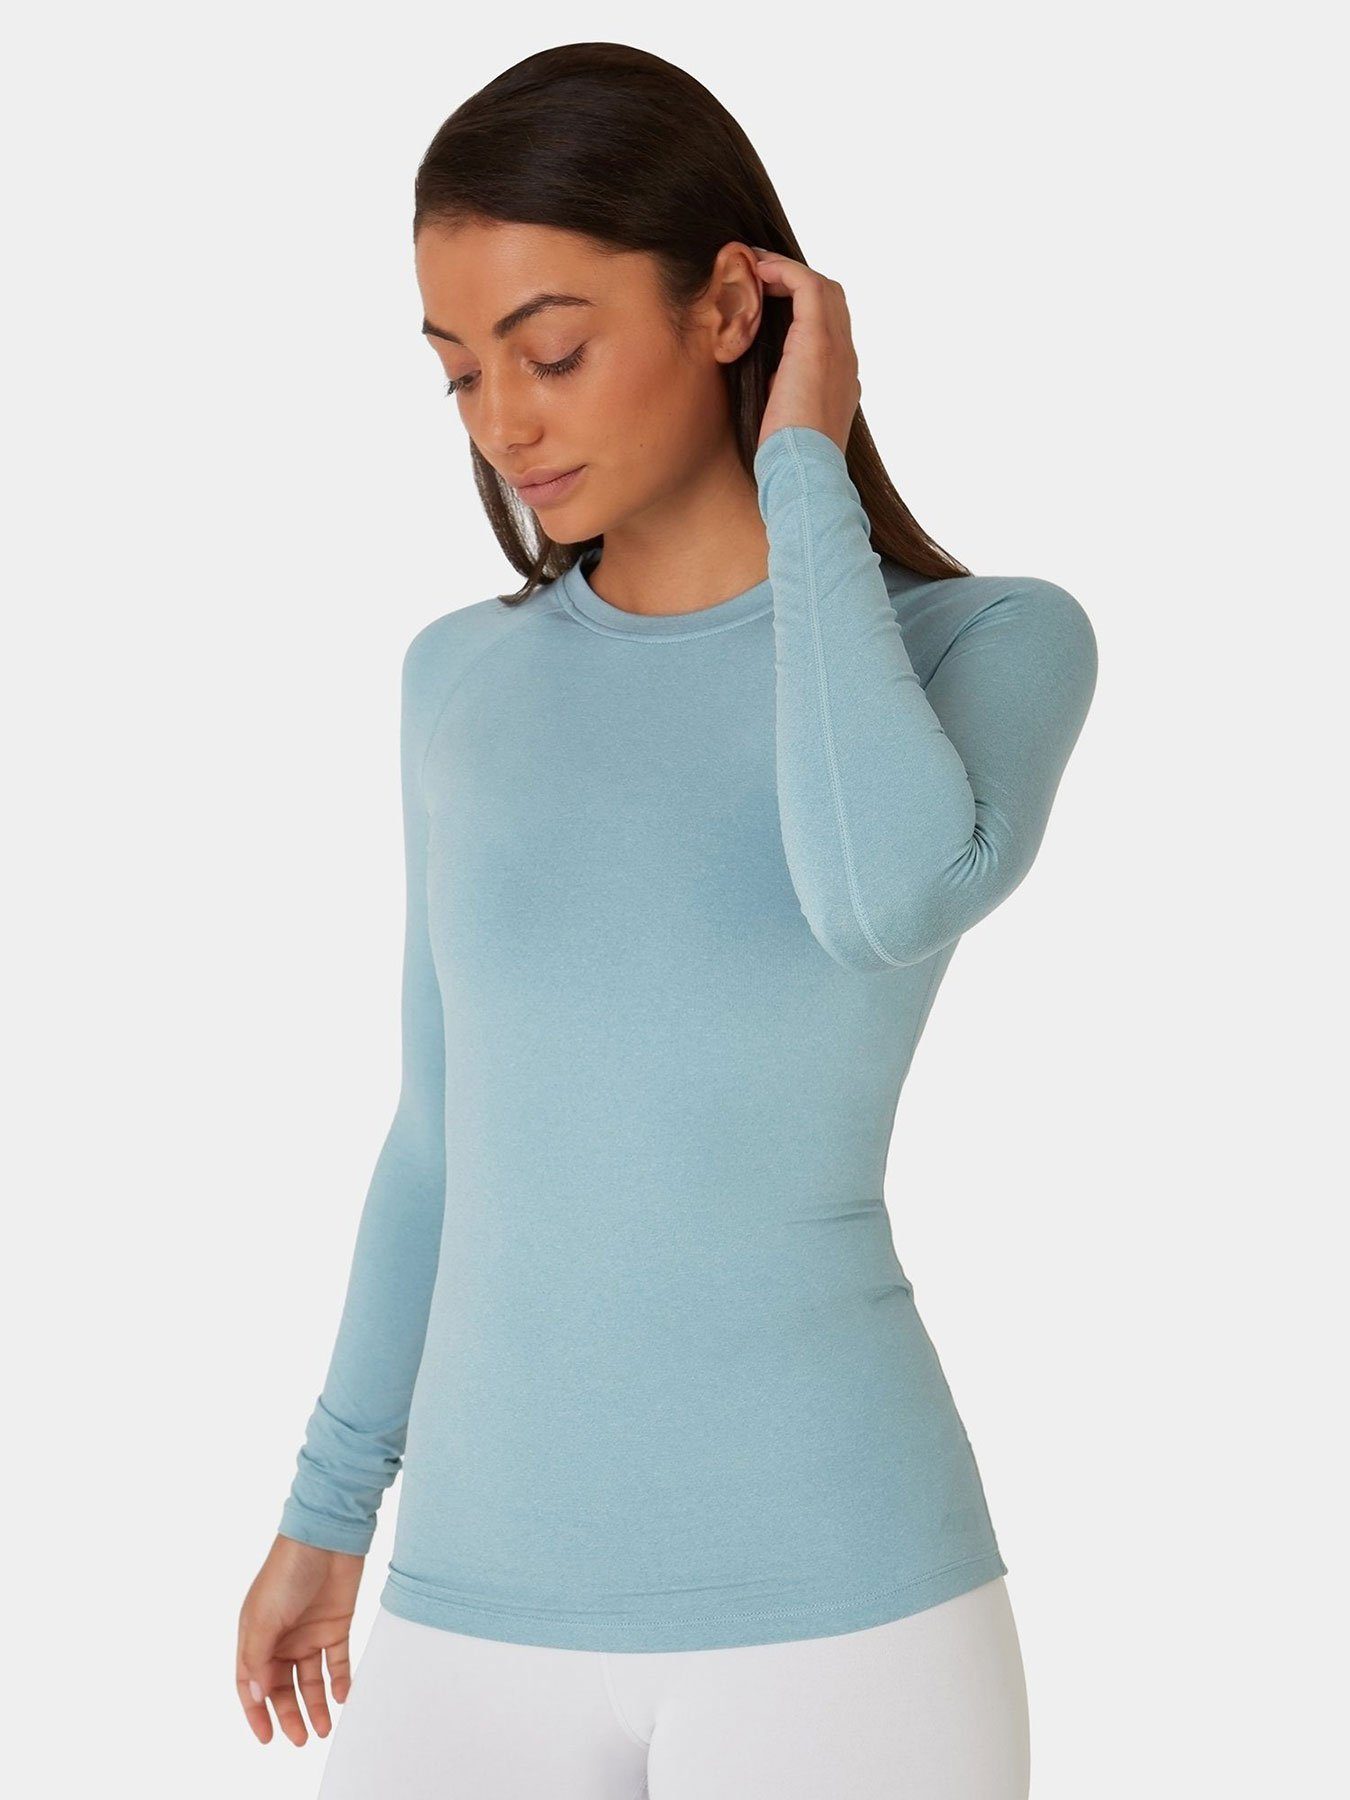 Women Long Sleeve Crew Neck Thermal Tops Ladies V-Neck Stretch Winter Warm  Shirt